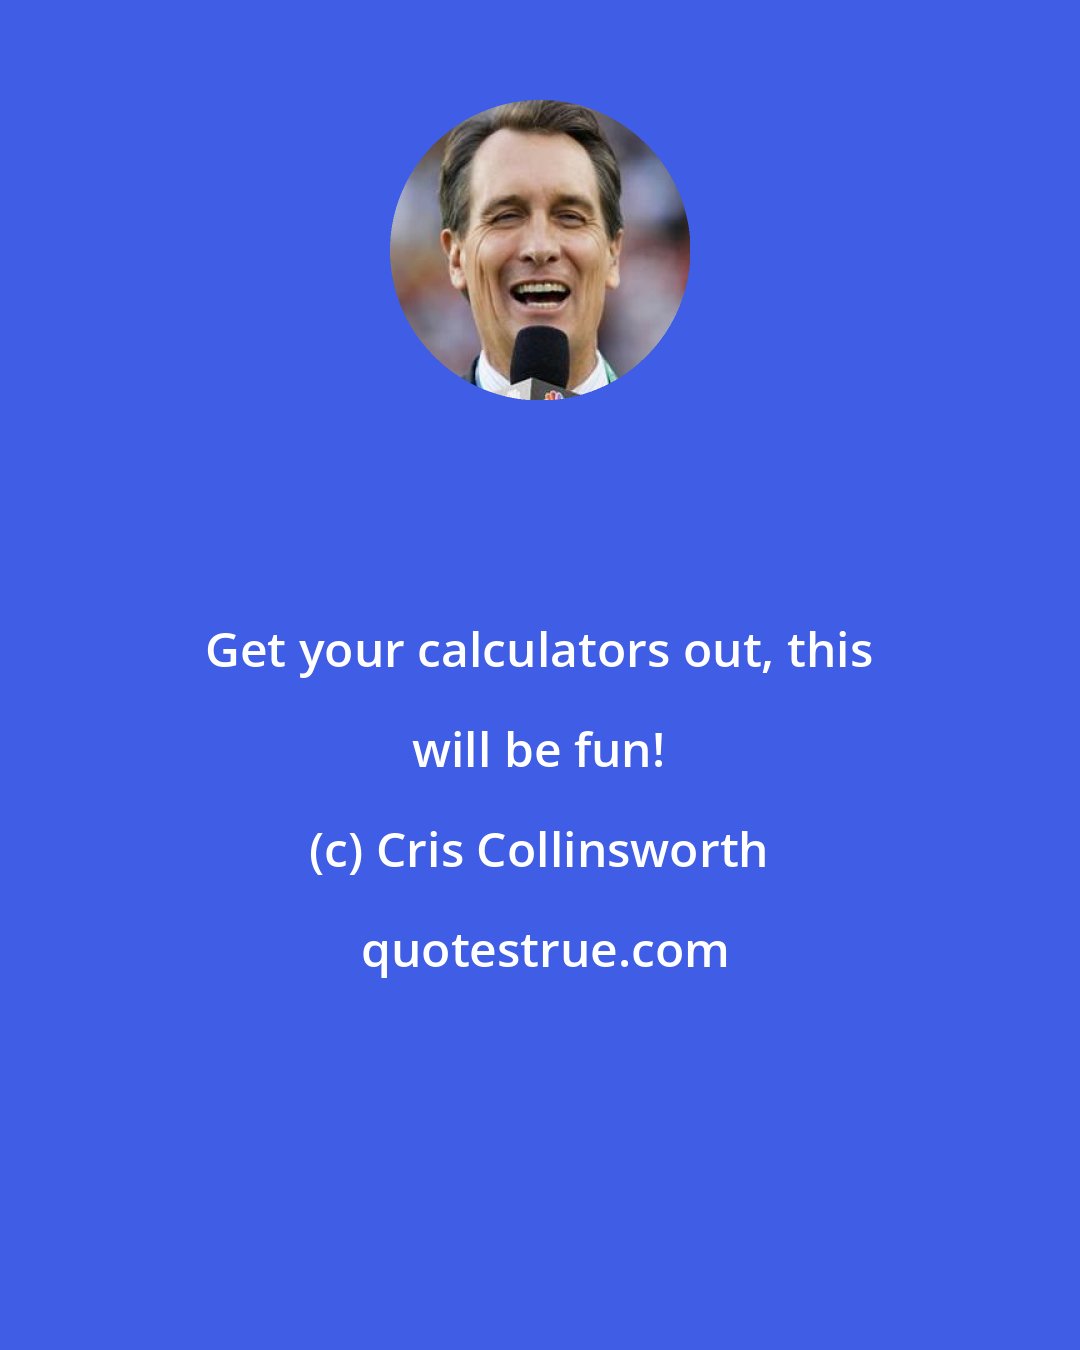 Cris Collinsworth: Get your calculators out, this will be fun!